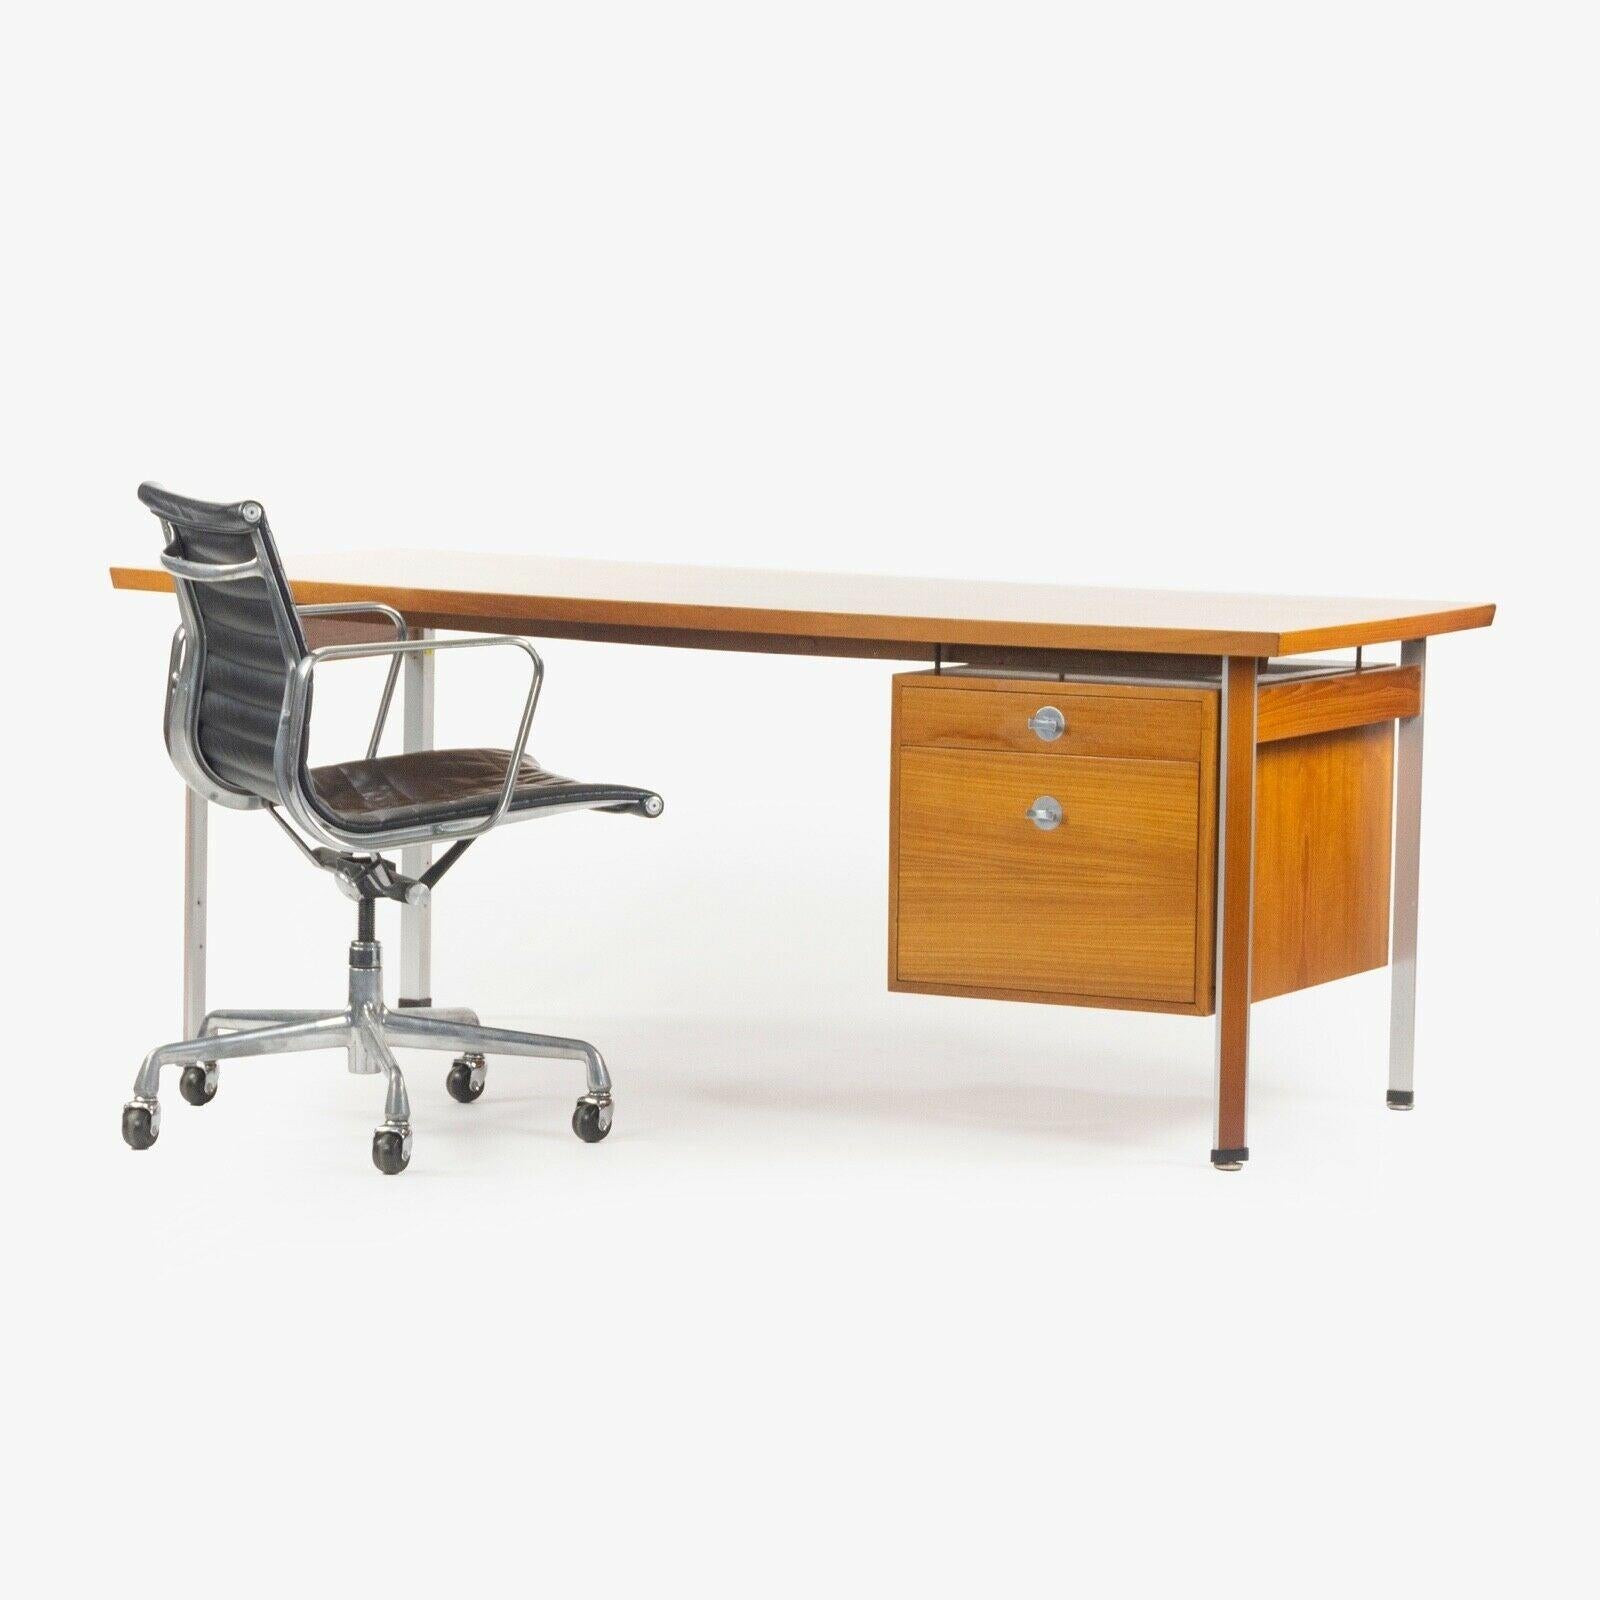 Listed for sale is a 1960's Finn Juhl for France & Son Technocrat Desk Model 963 in Teak. Overall this item is in very good to excellent condition. The wood top is free from any major scratches, stains, or major imperfections. It has aged quite